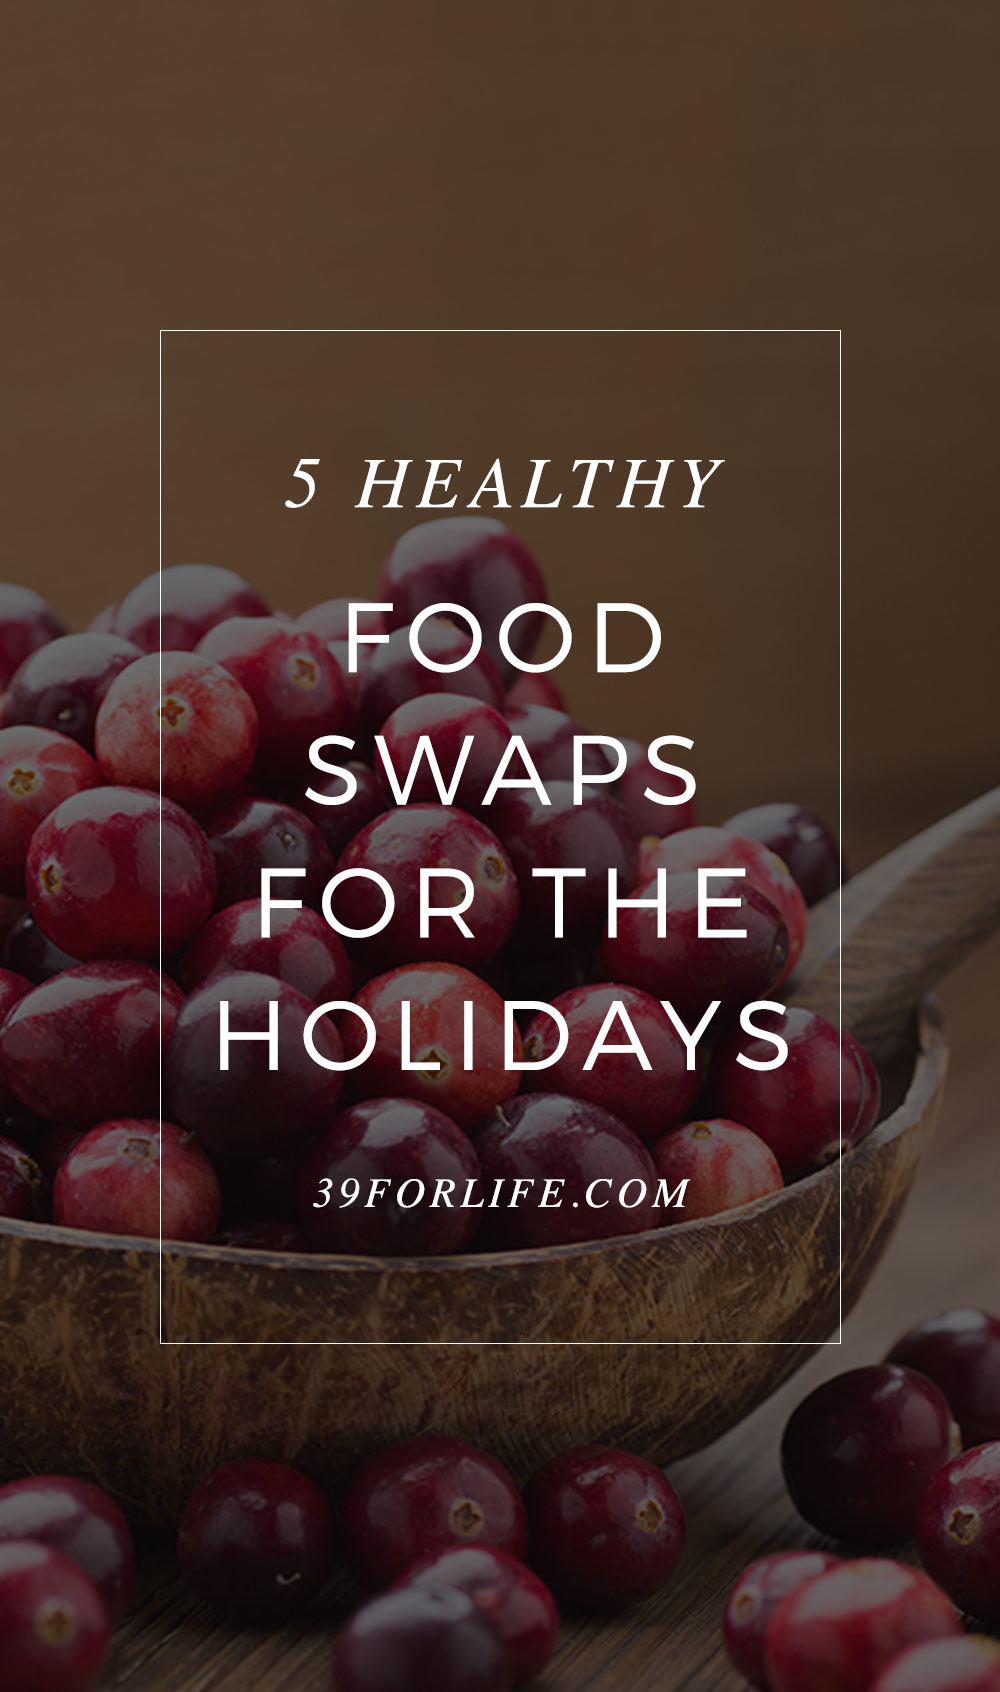 Curb your eating habits without losing all the flavor with these five healthy food swaps!